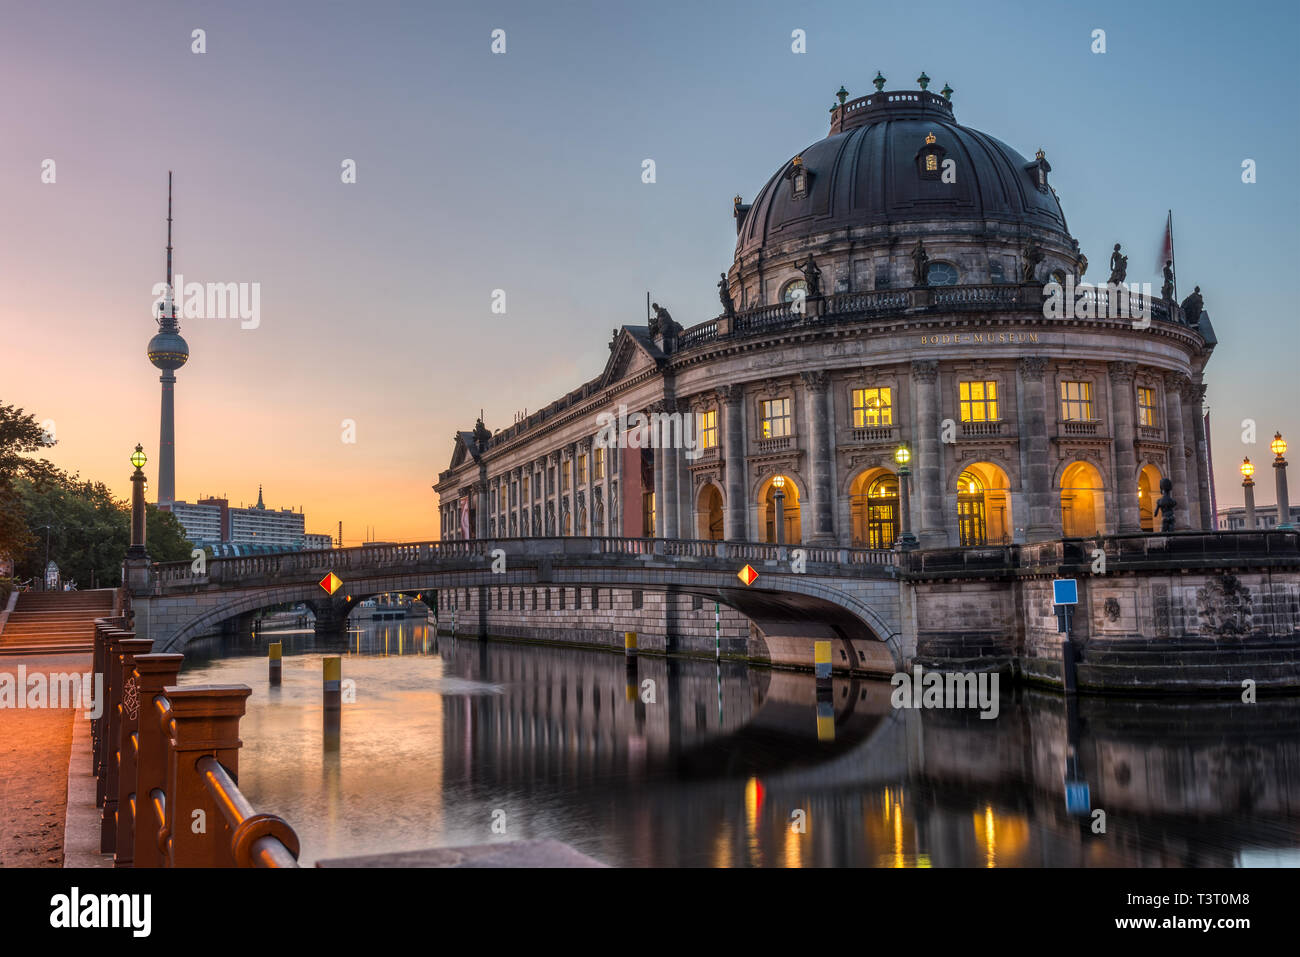 The Bode Museum and the Television Tower in Berlin at dawn Stock Photo